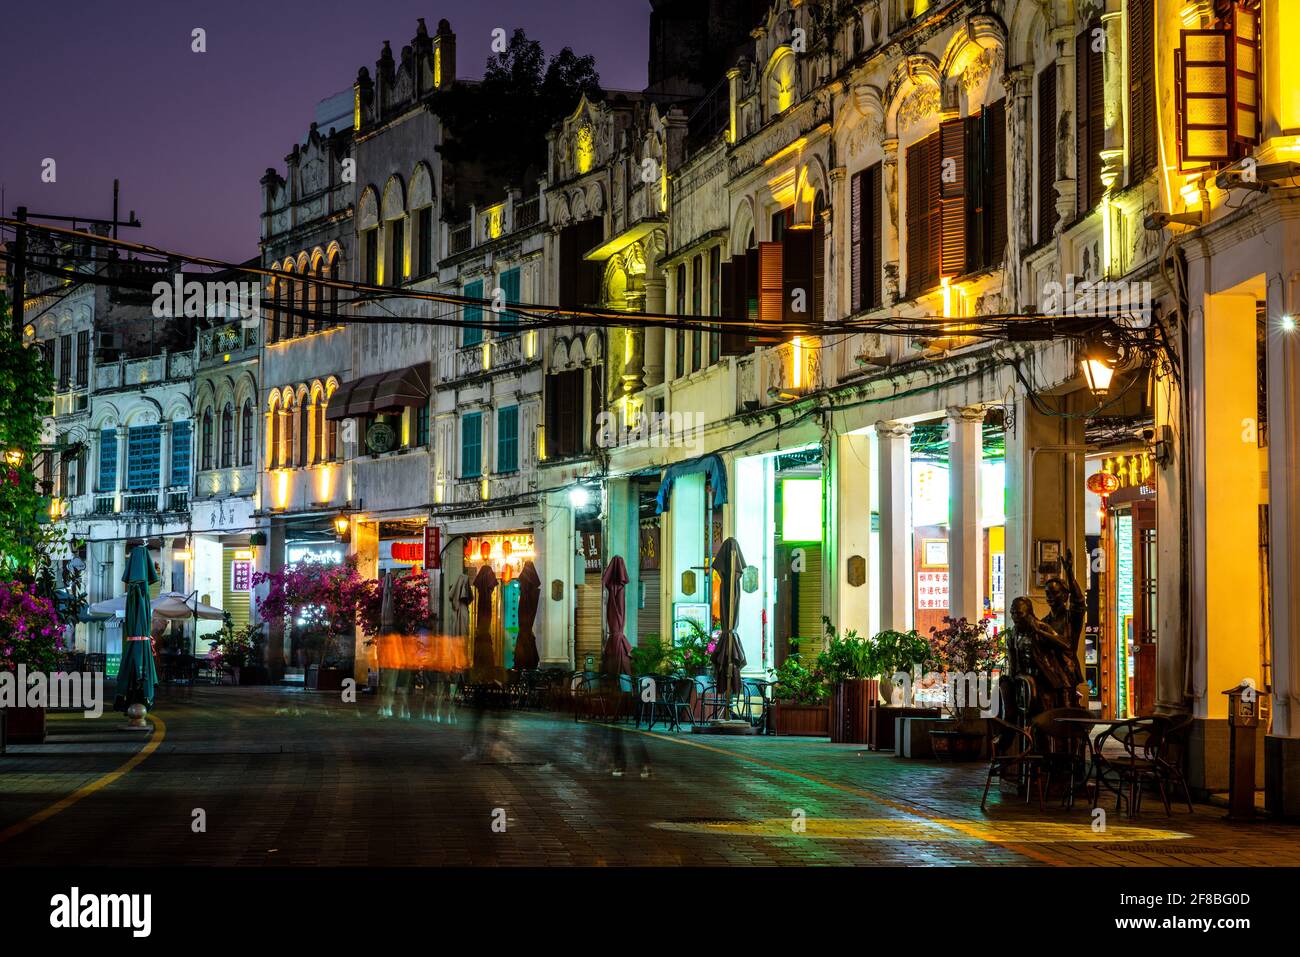 Haikou China , 23 March 2021 : Qilou or Zhongshan old street scenic view illuminated at night with colonial buildings in Haikou old town Hainan China Stock Photo